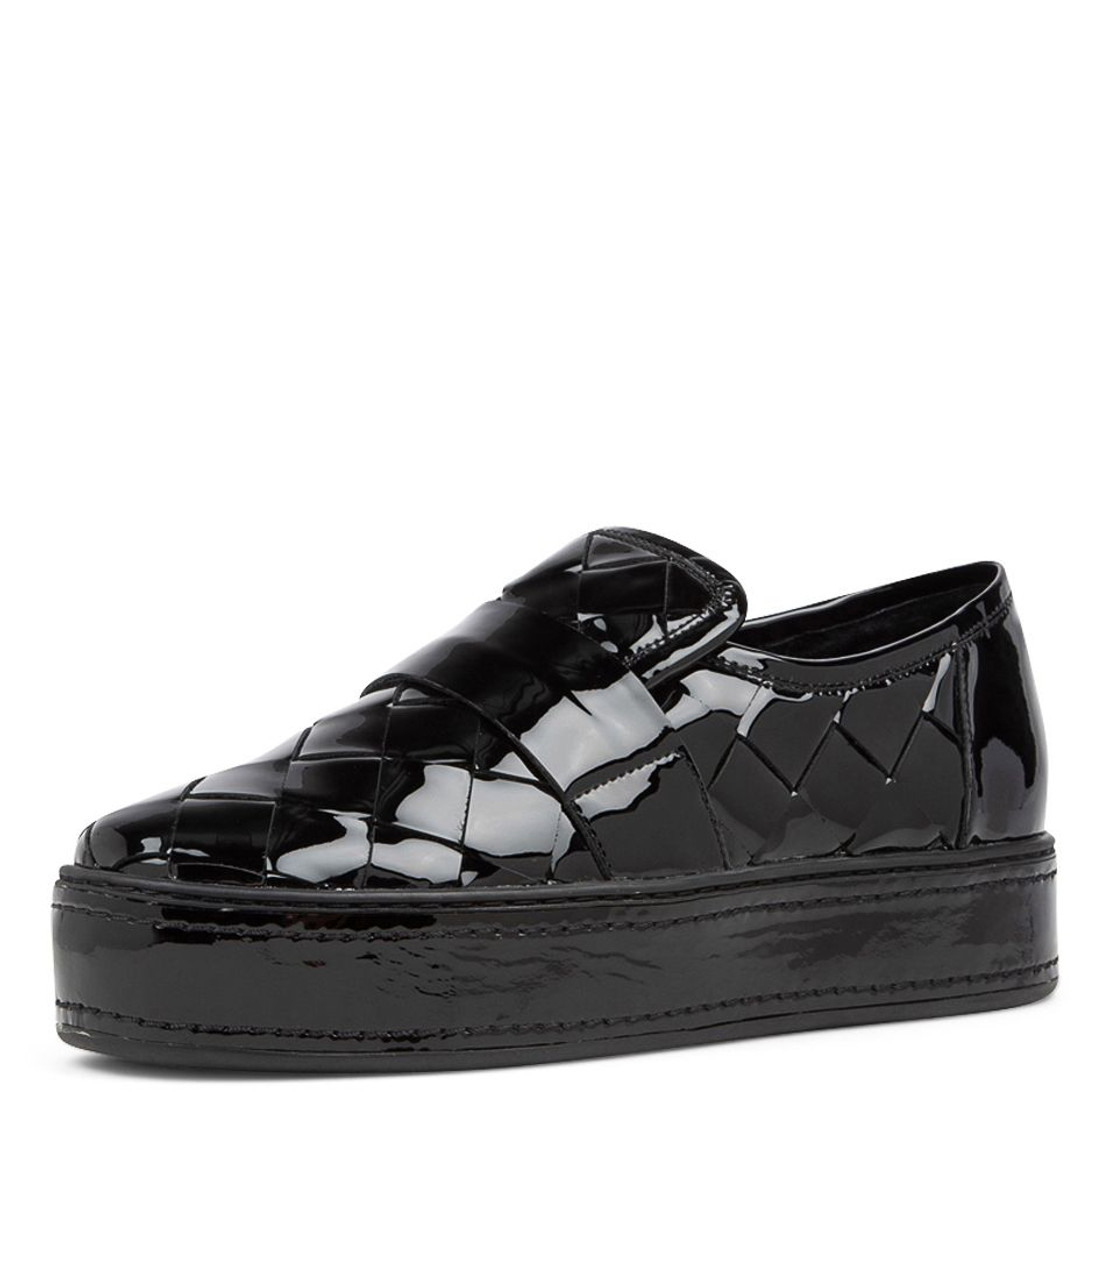 Gustave Black Patent Leather Sneakers - Django and Juliette